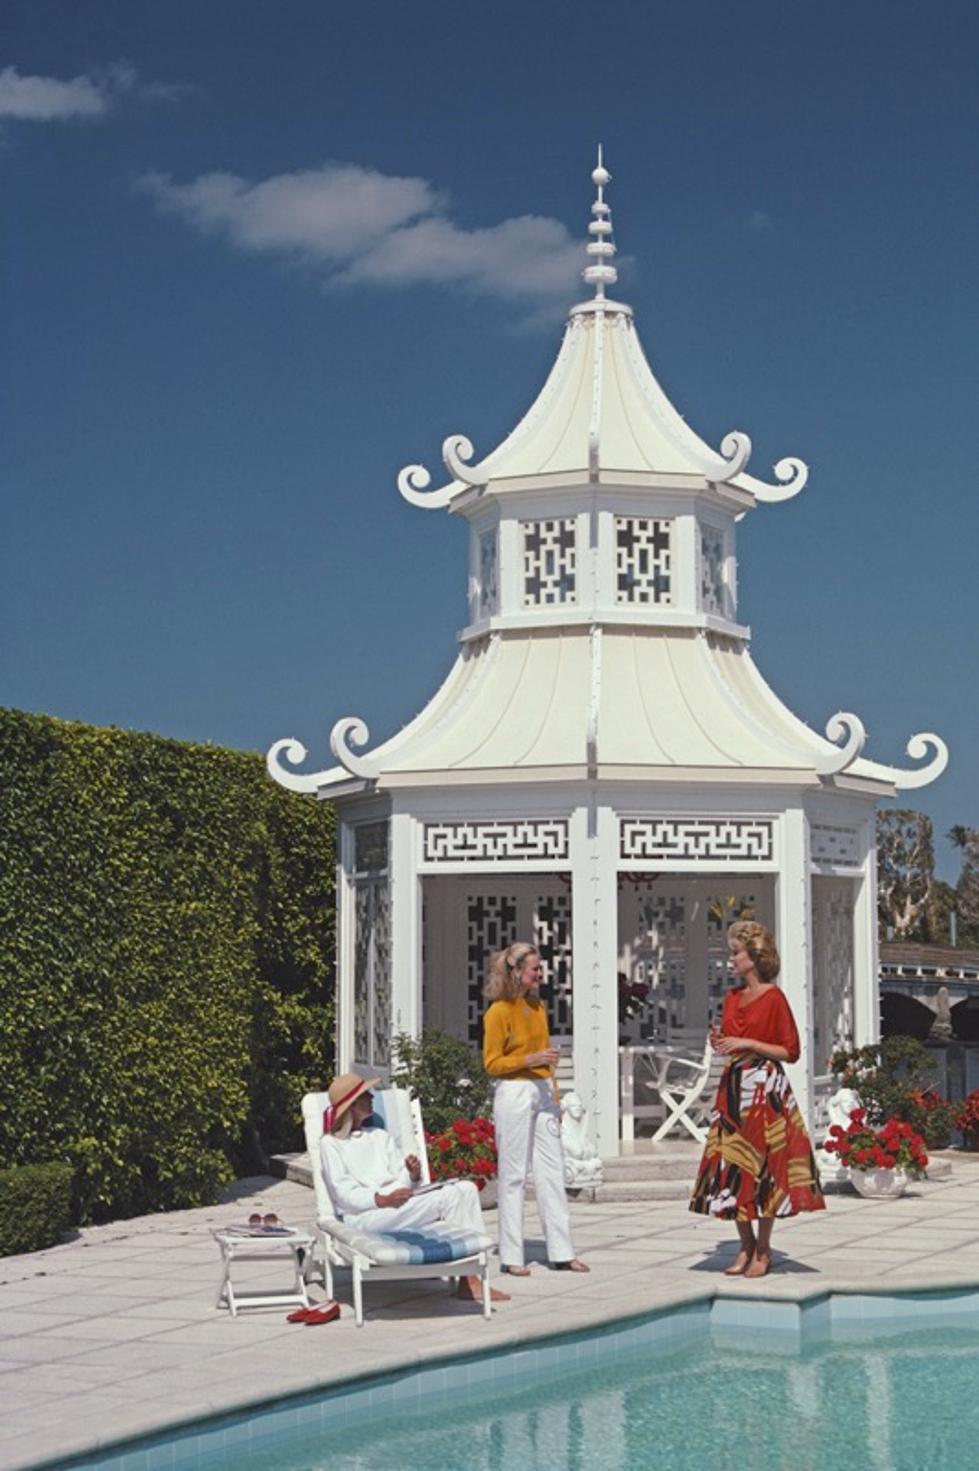 Palm Beach Pagoda 
1985
by Slim Aarons

Slim Aarons Limited Estate Edition

Cynthia Eichler (sitting) with Vicky Schaft Bruder (centre) and Cathy Tankoos (Mrs Joseph Tankoos) by the CHinese teahouse on Everglades Island in Palm Beach, Florida, April